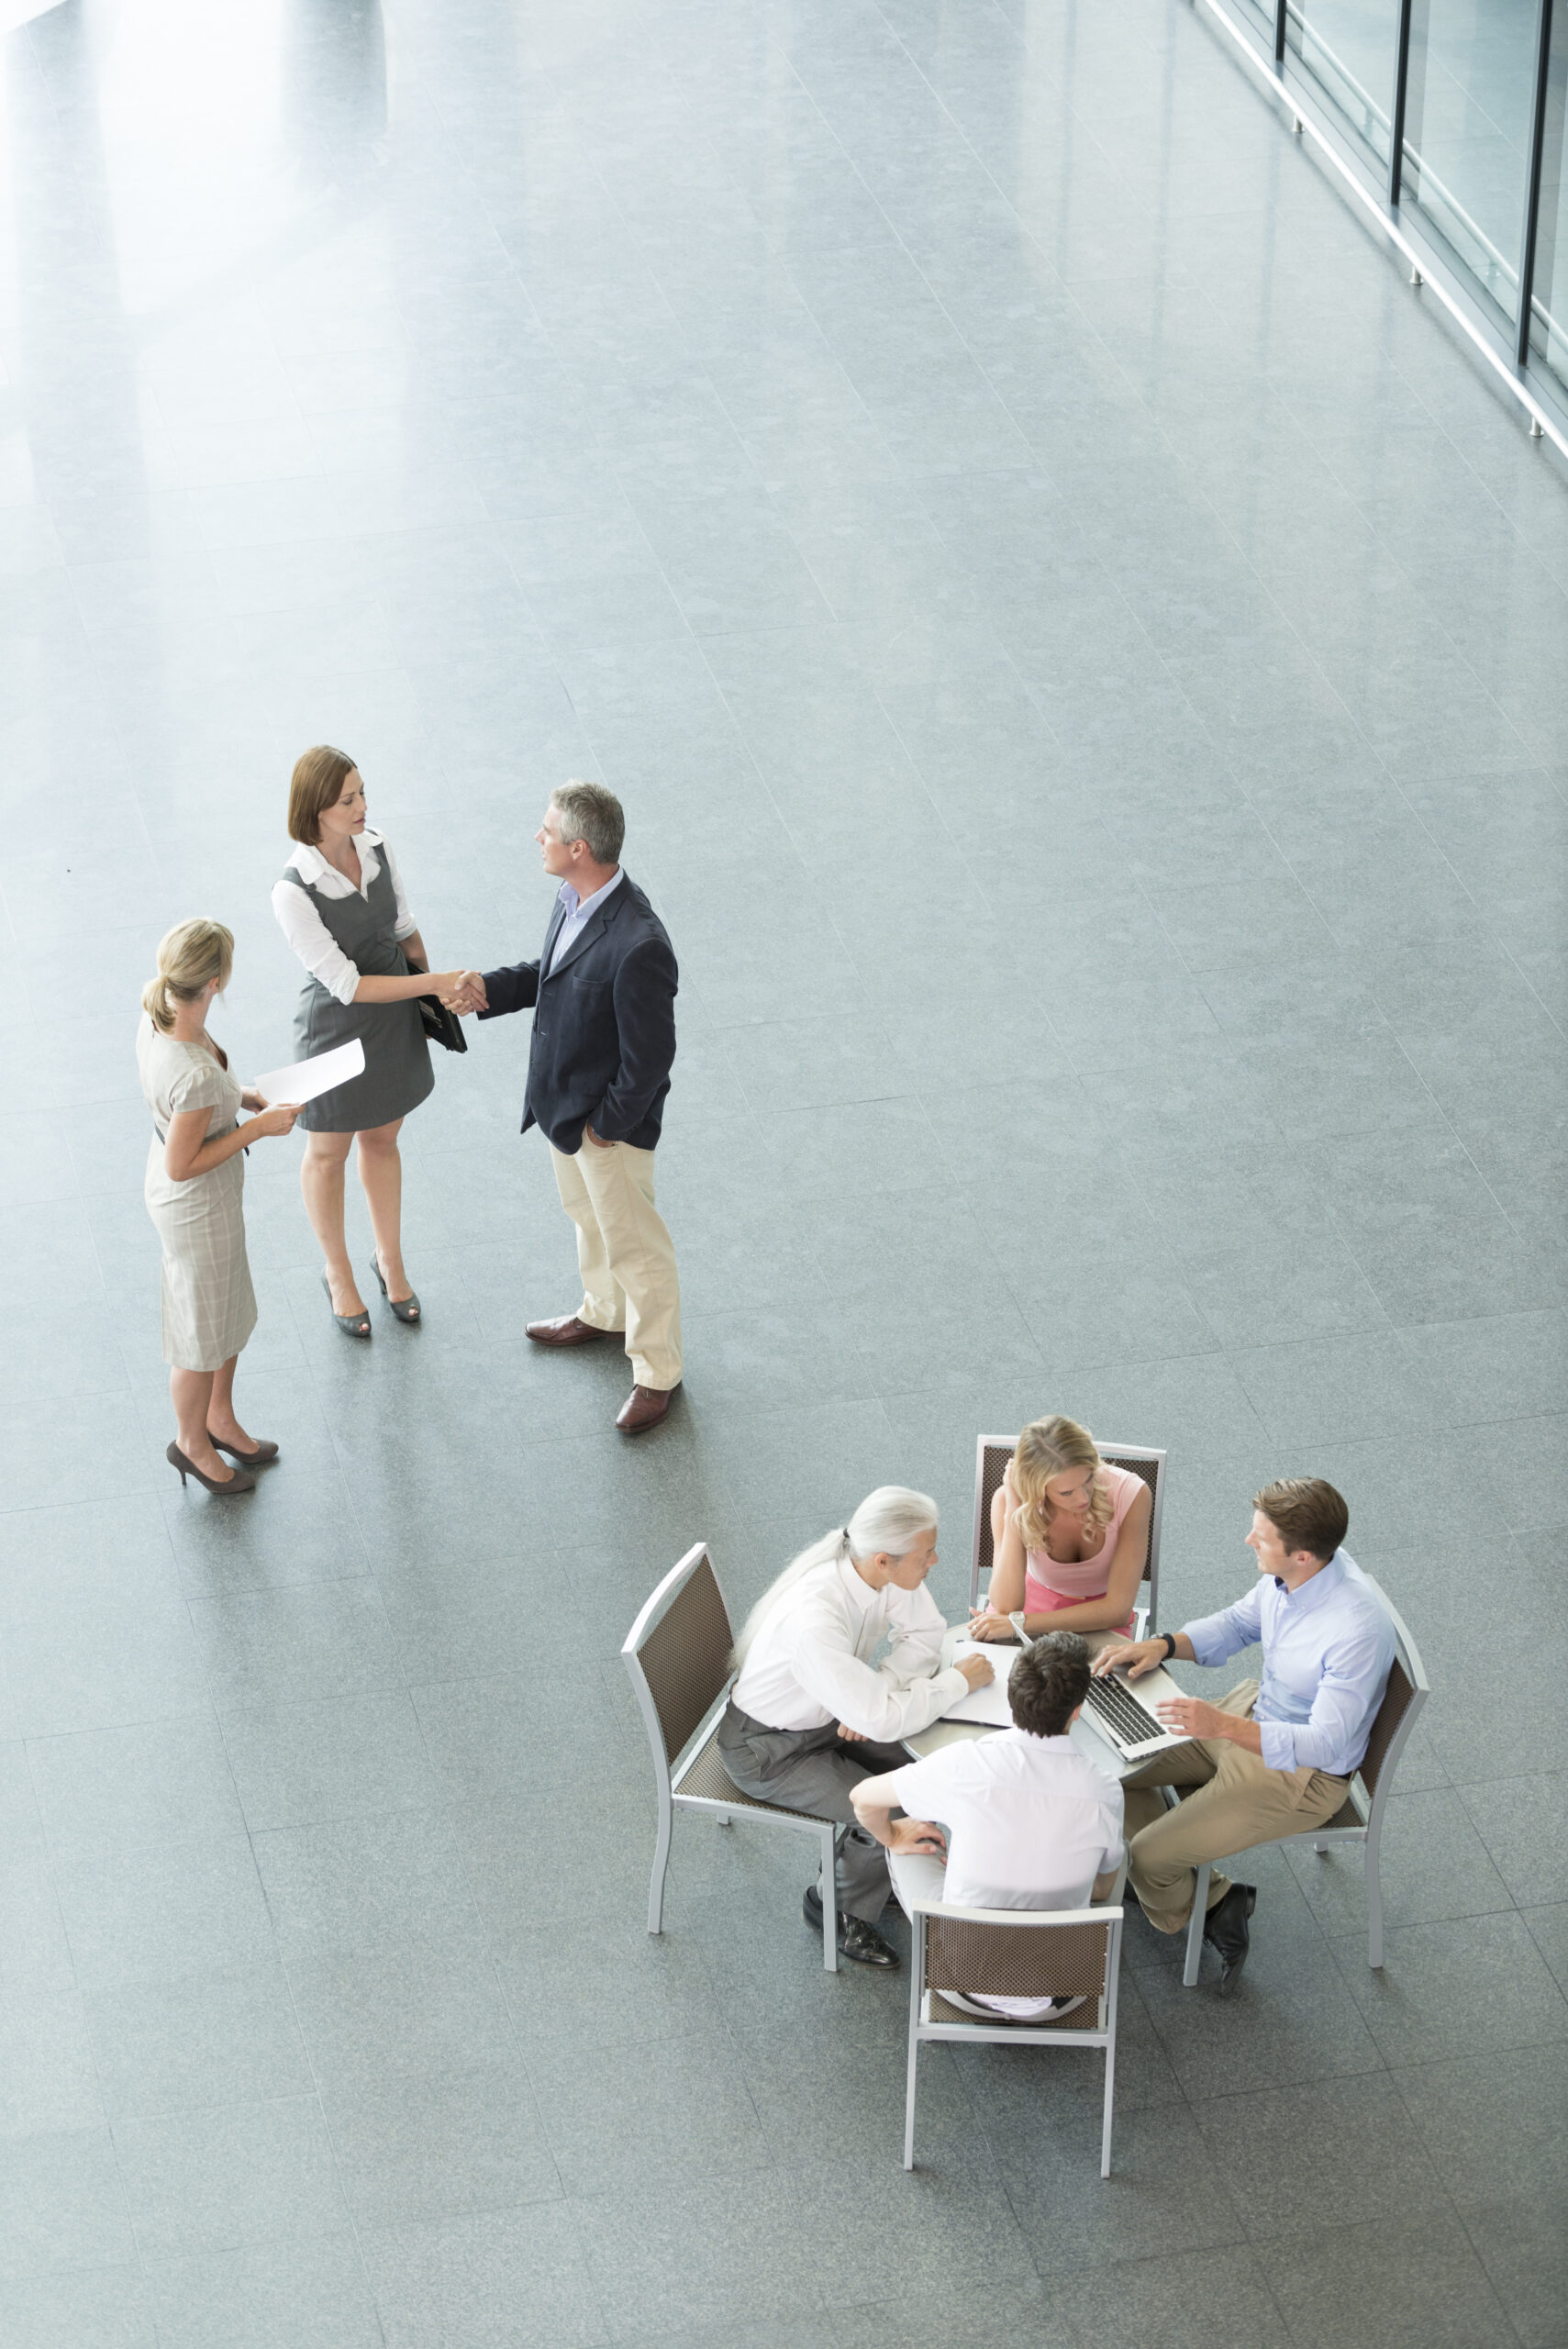 Overhead view of businesspeople meeting in a building lobby.